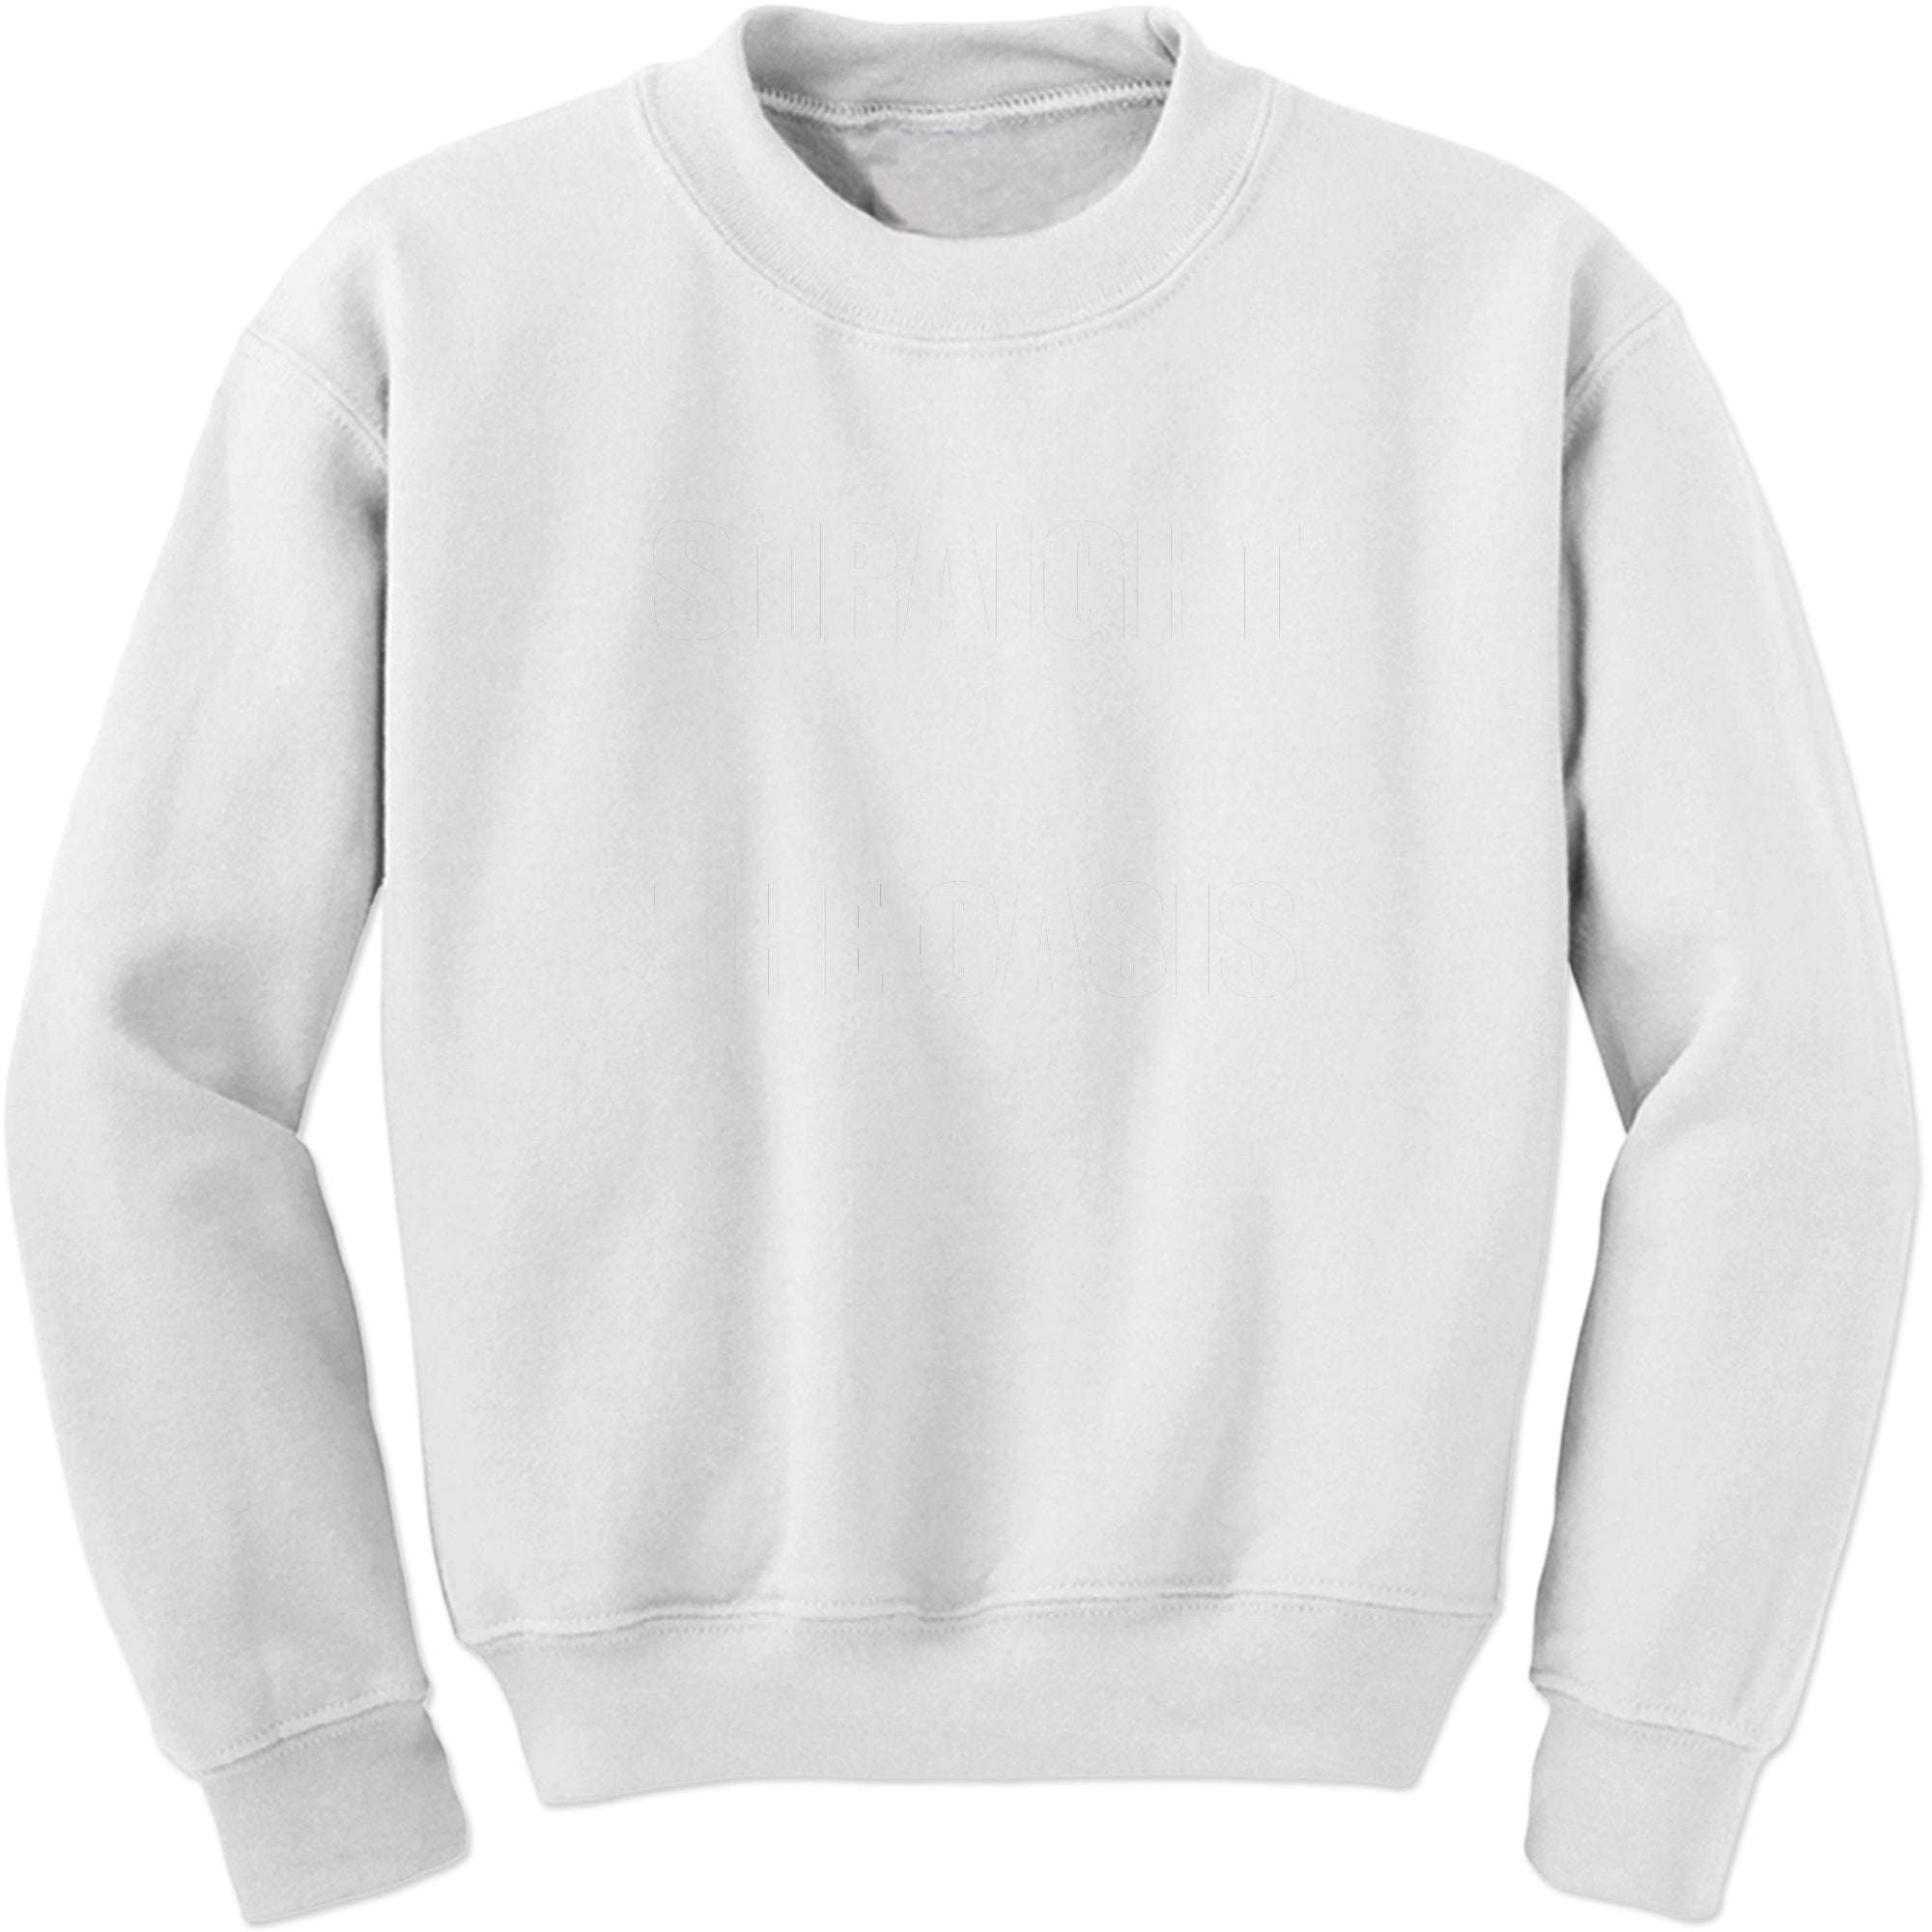 Striaght Outta The Oasis player one ready Sweatshirt